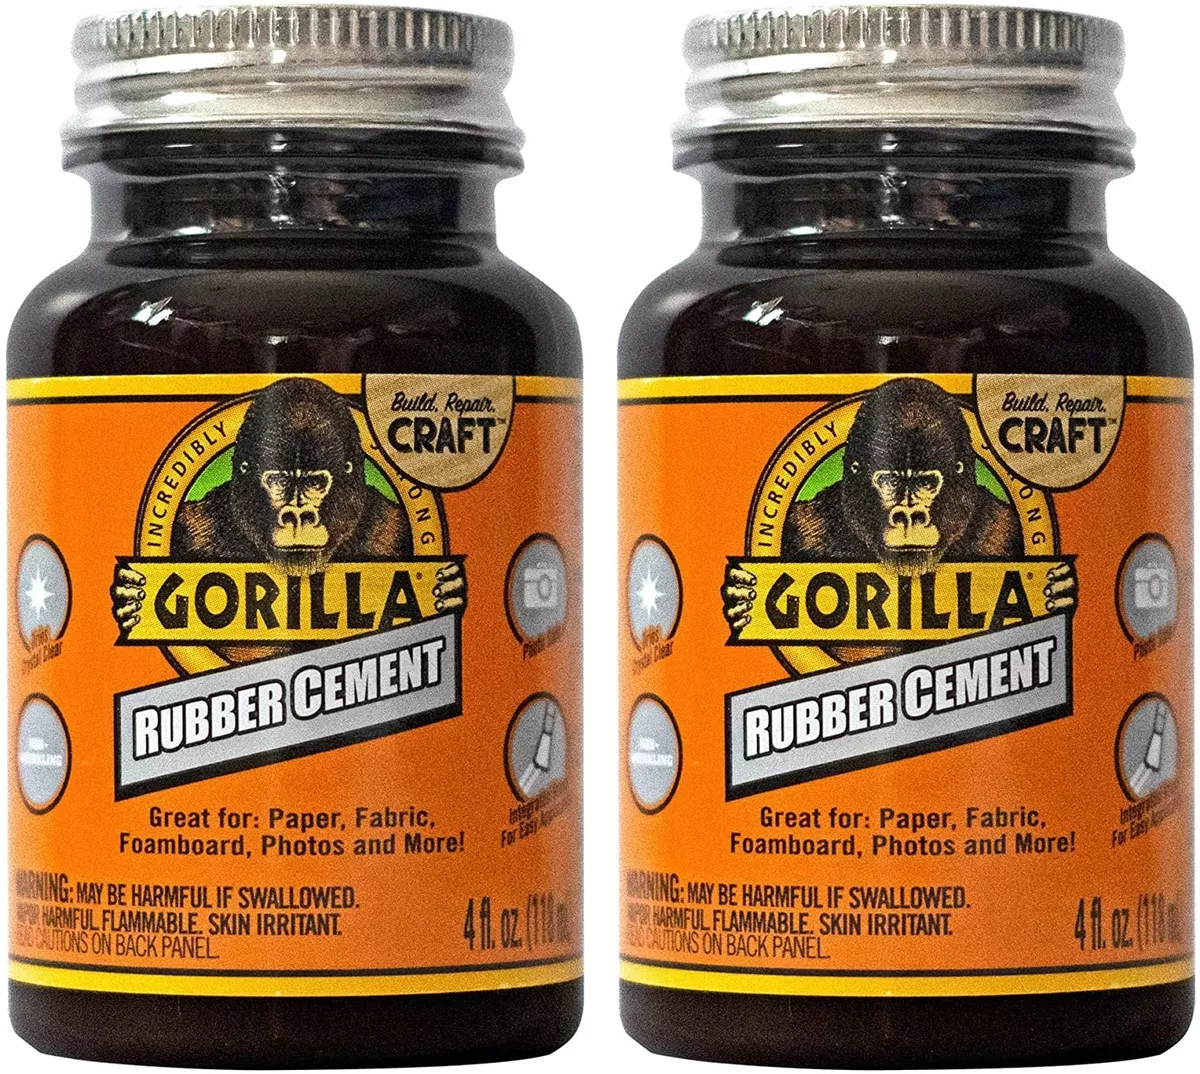 Gorilla Rubber Cement with Brush Applicator, 4 Ounce, Clear, (Pack of 2)